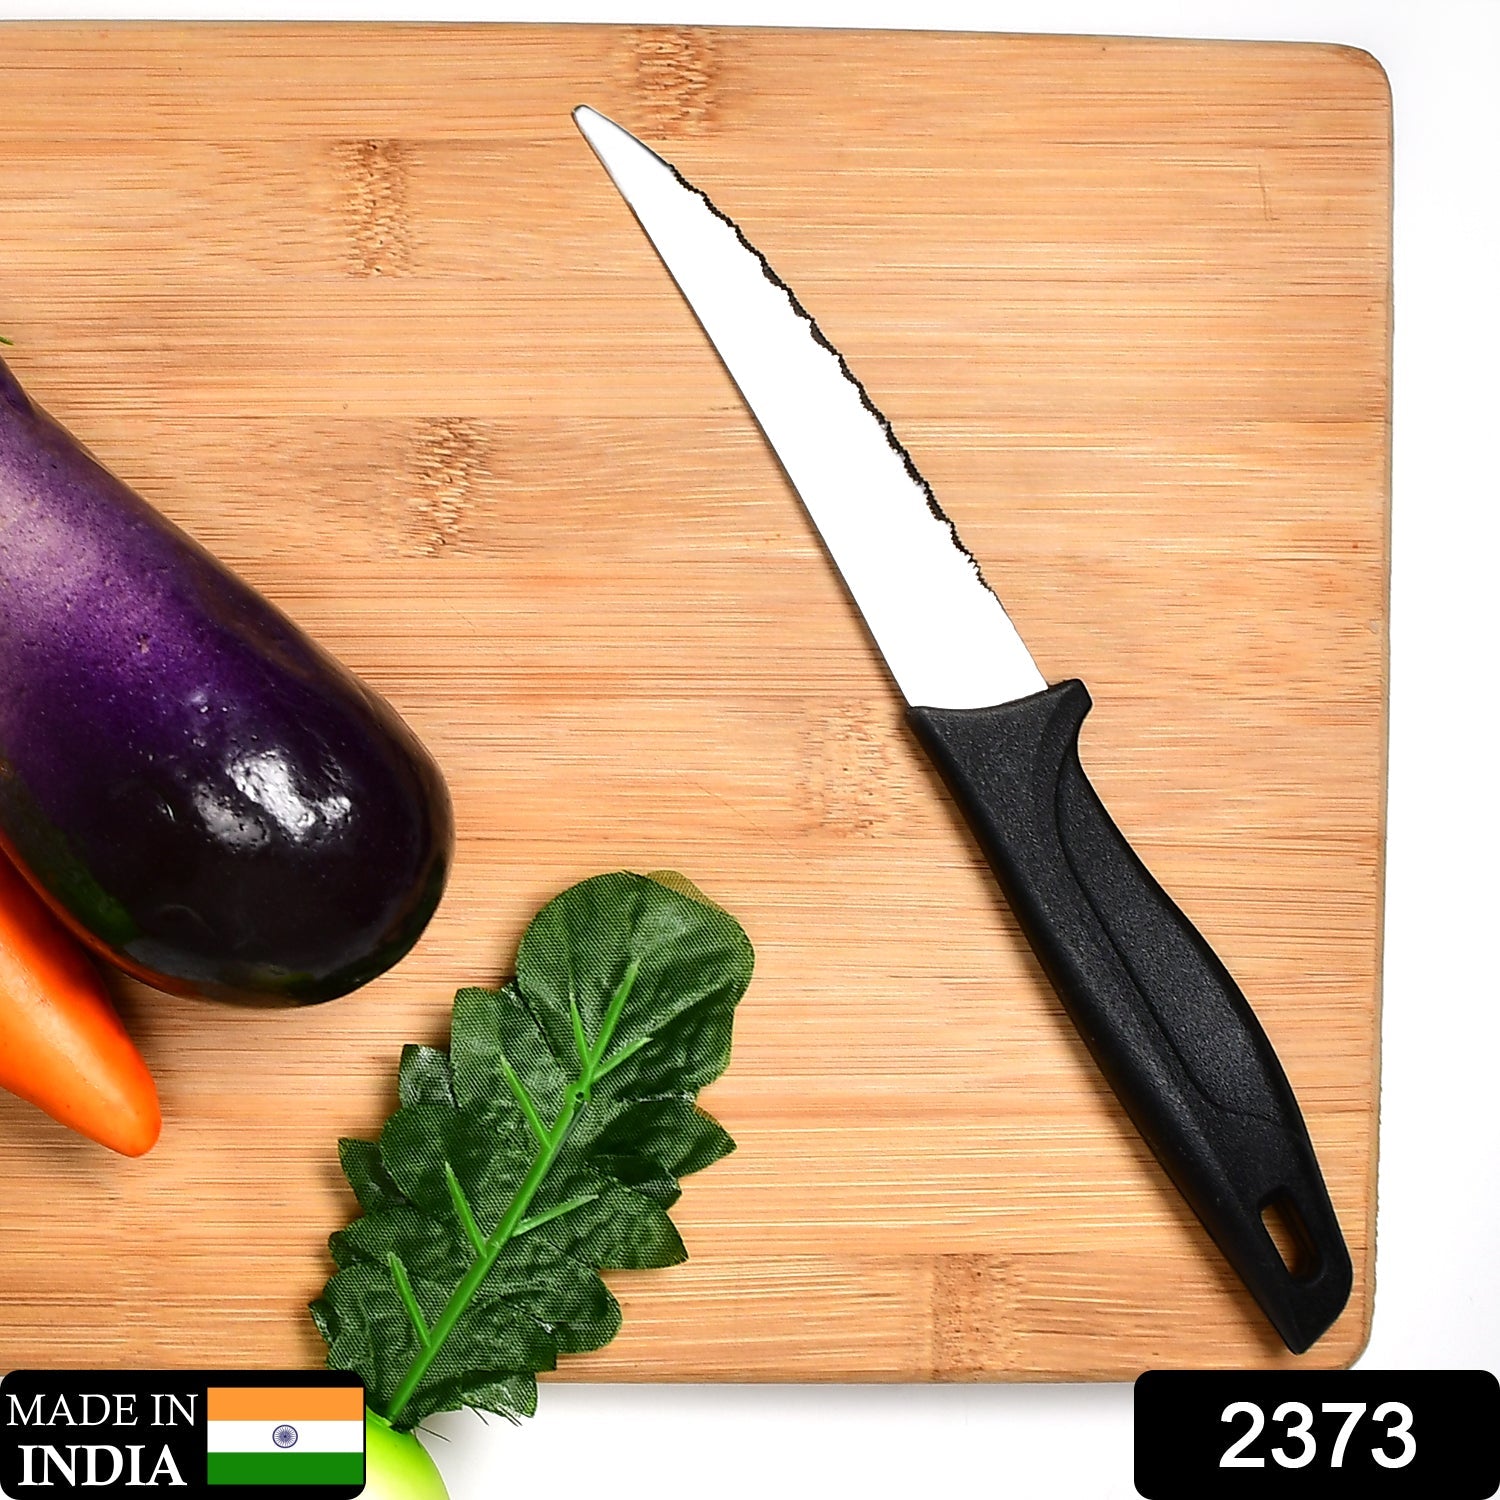 2373 Stainless Steel knife and Kitchen Knife with Black Grip Handle. DeoDap